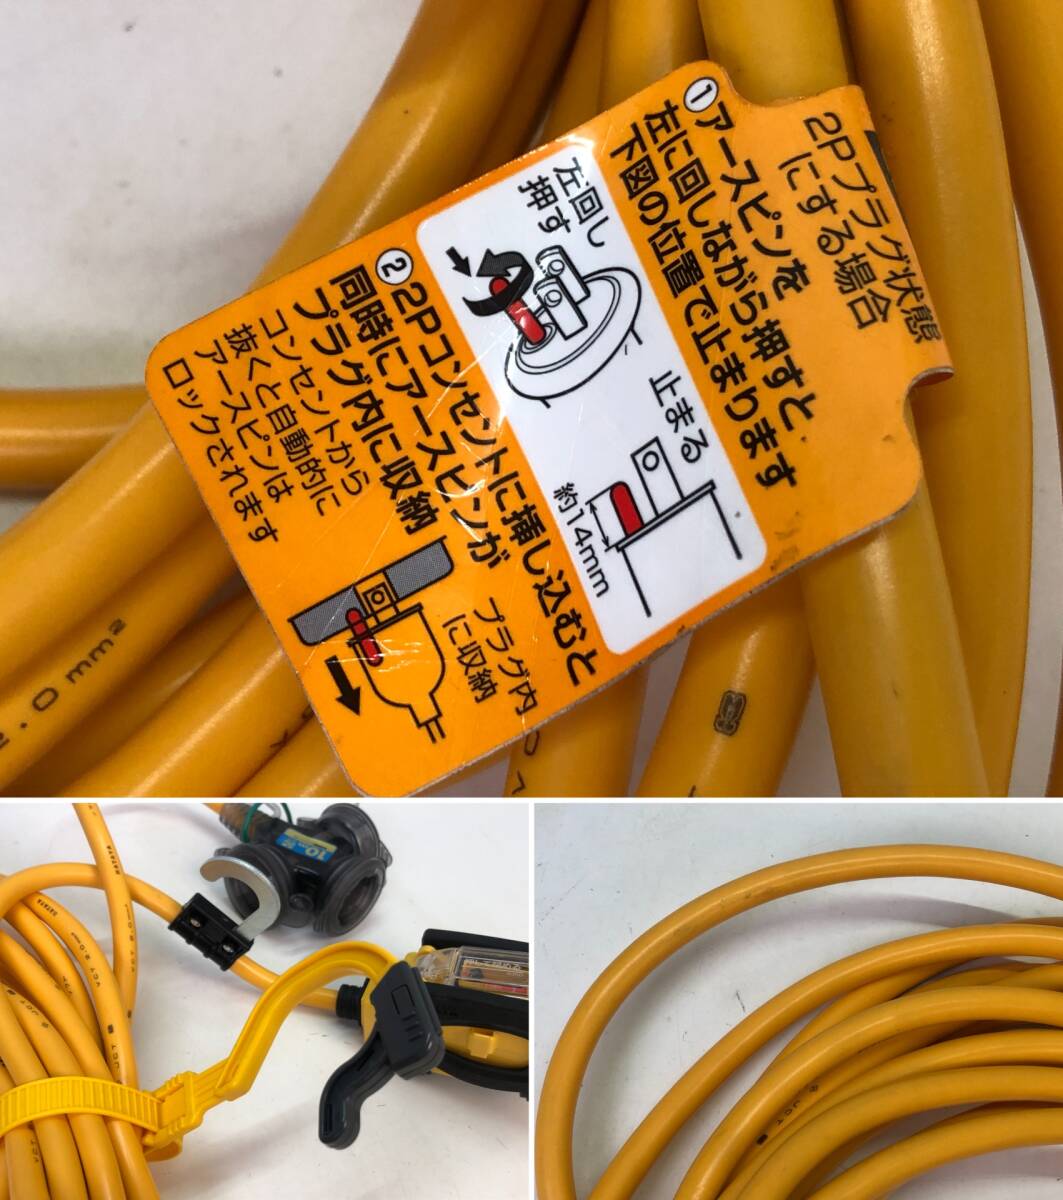 [9494]HATAYA is Taya BFX extender BFX-103KC 10m 3. outlet type outdoors for rainproof type . load leak electro- blocking vessel attaching present condition goods 